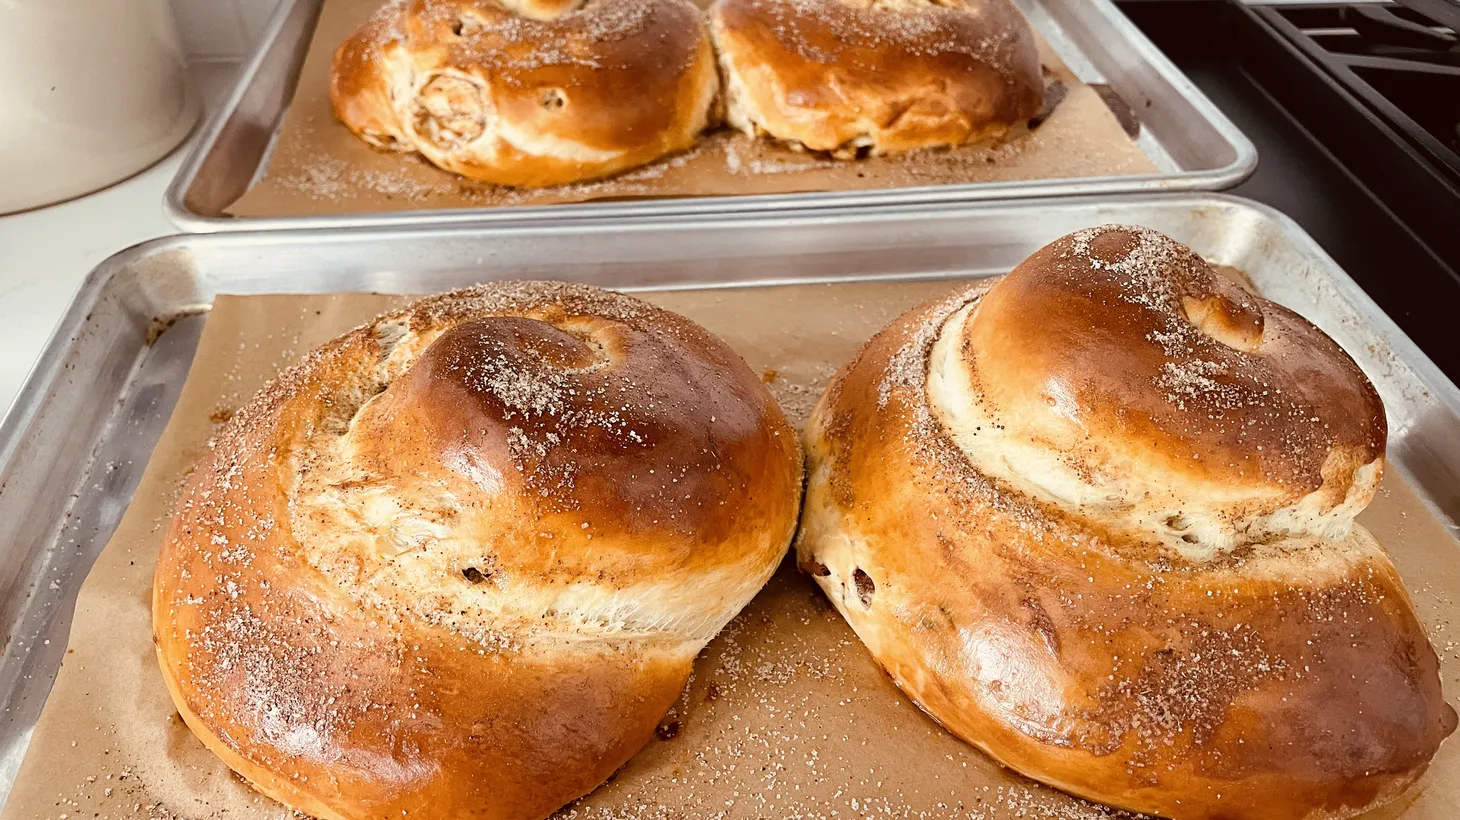 Baked T’Shuvah’s special apple cinnamon challah is ready for High Holy days.